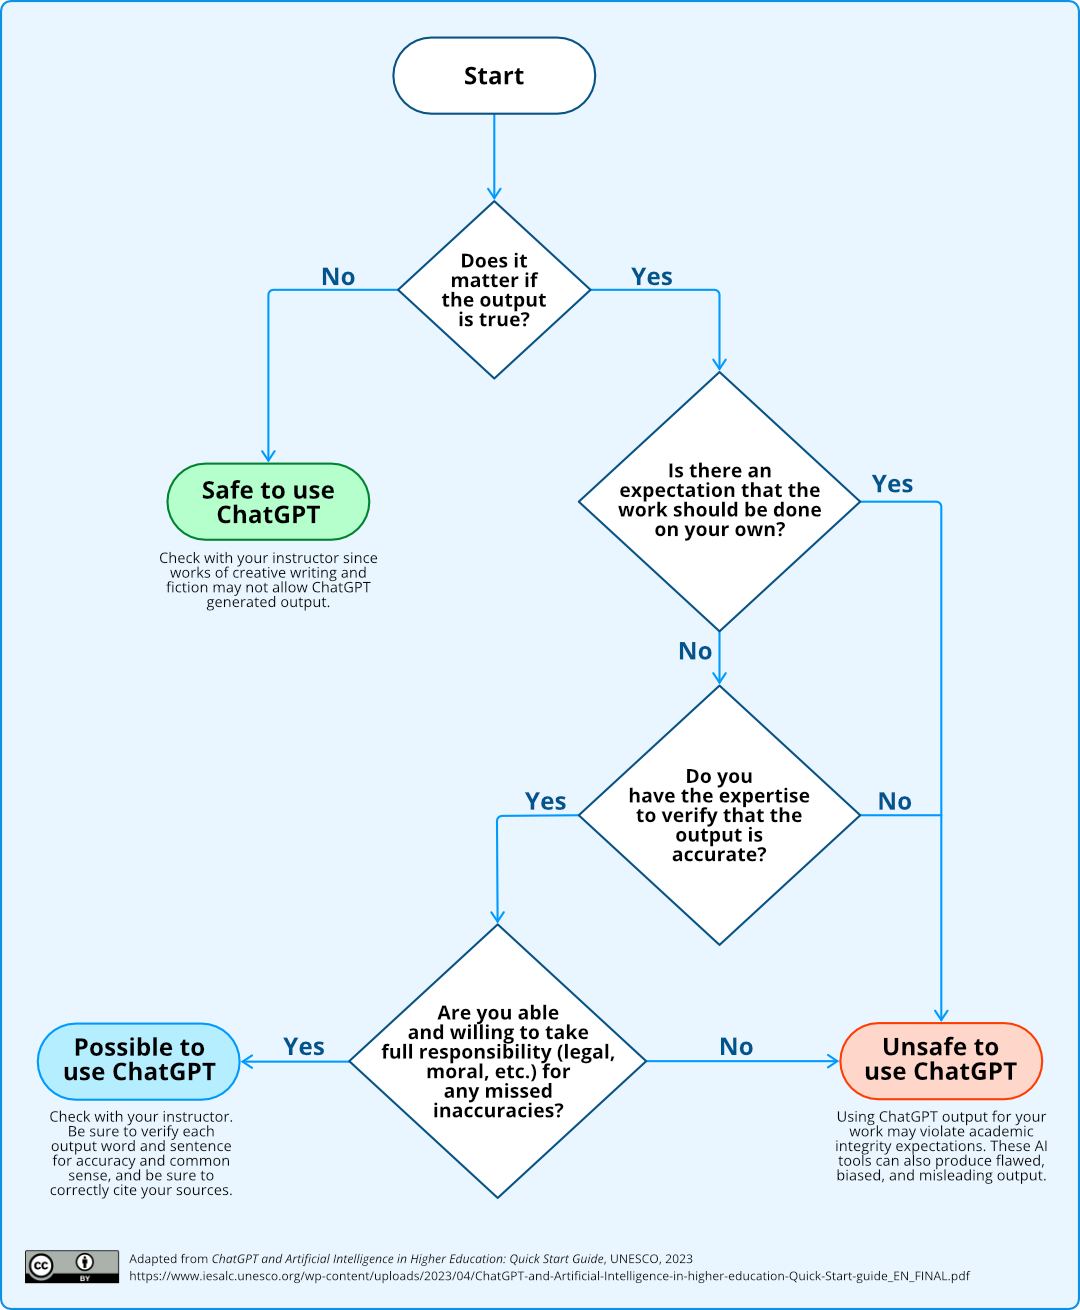 A flowchart evaluating whether it is safe or appropriate to use ChatGPT in higher education.